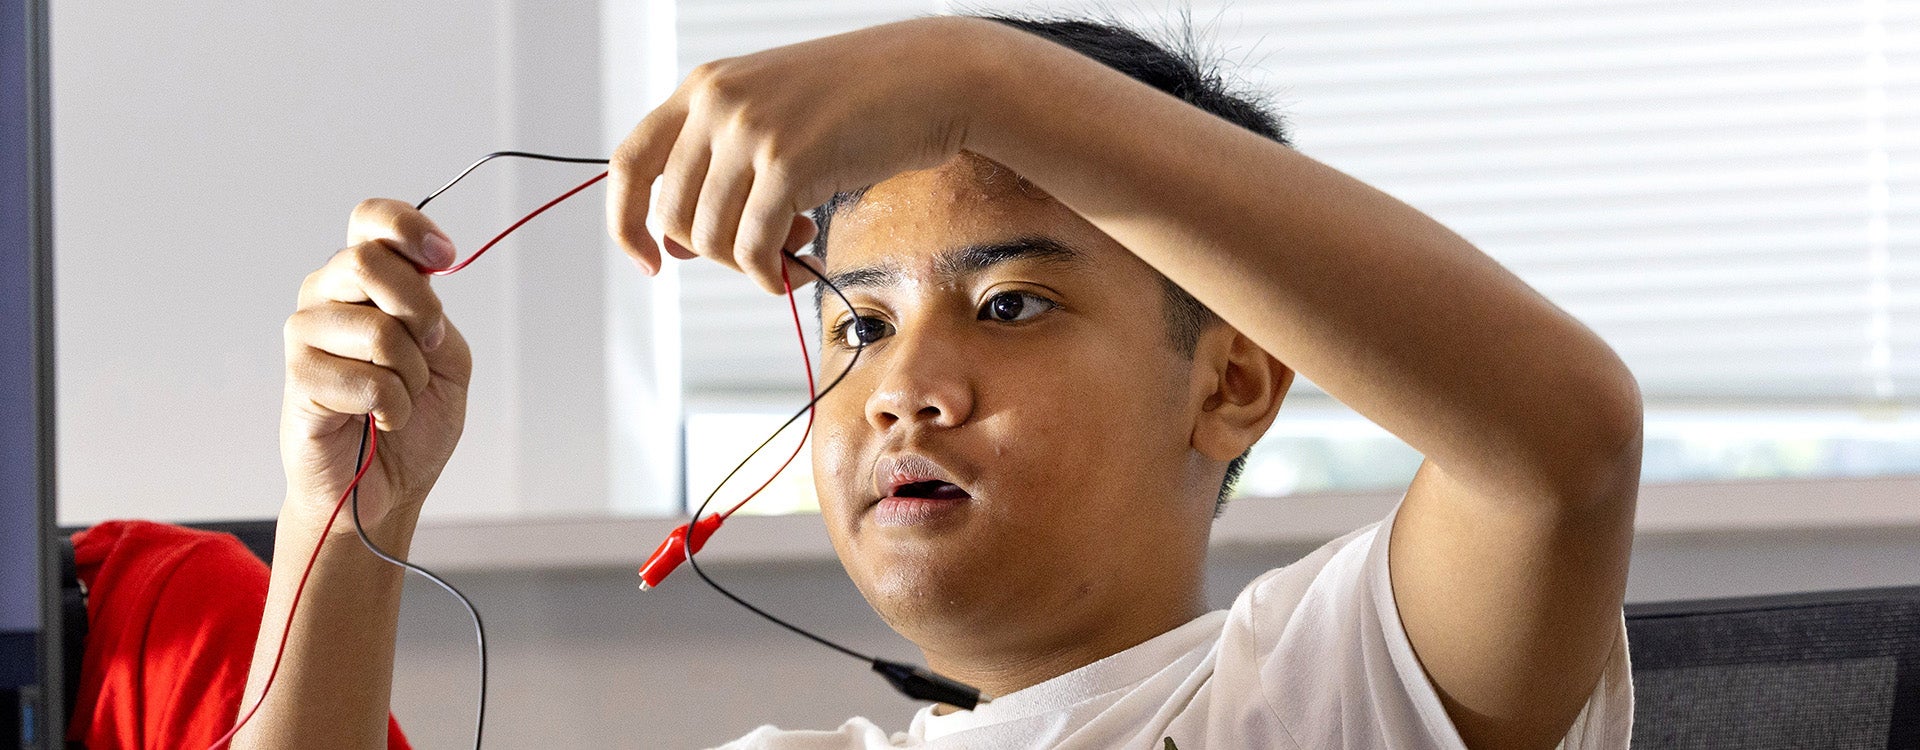 Dustin Mondejar, 13, sorts wires as part of a solar energy experiment during the Department of Technology Systems’ Renewable Energy and Green Manufacturing Academy summer camp at ECU. (Photos by Rhett Butler)